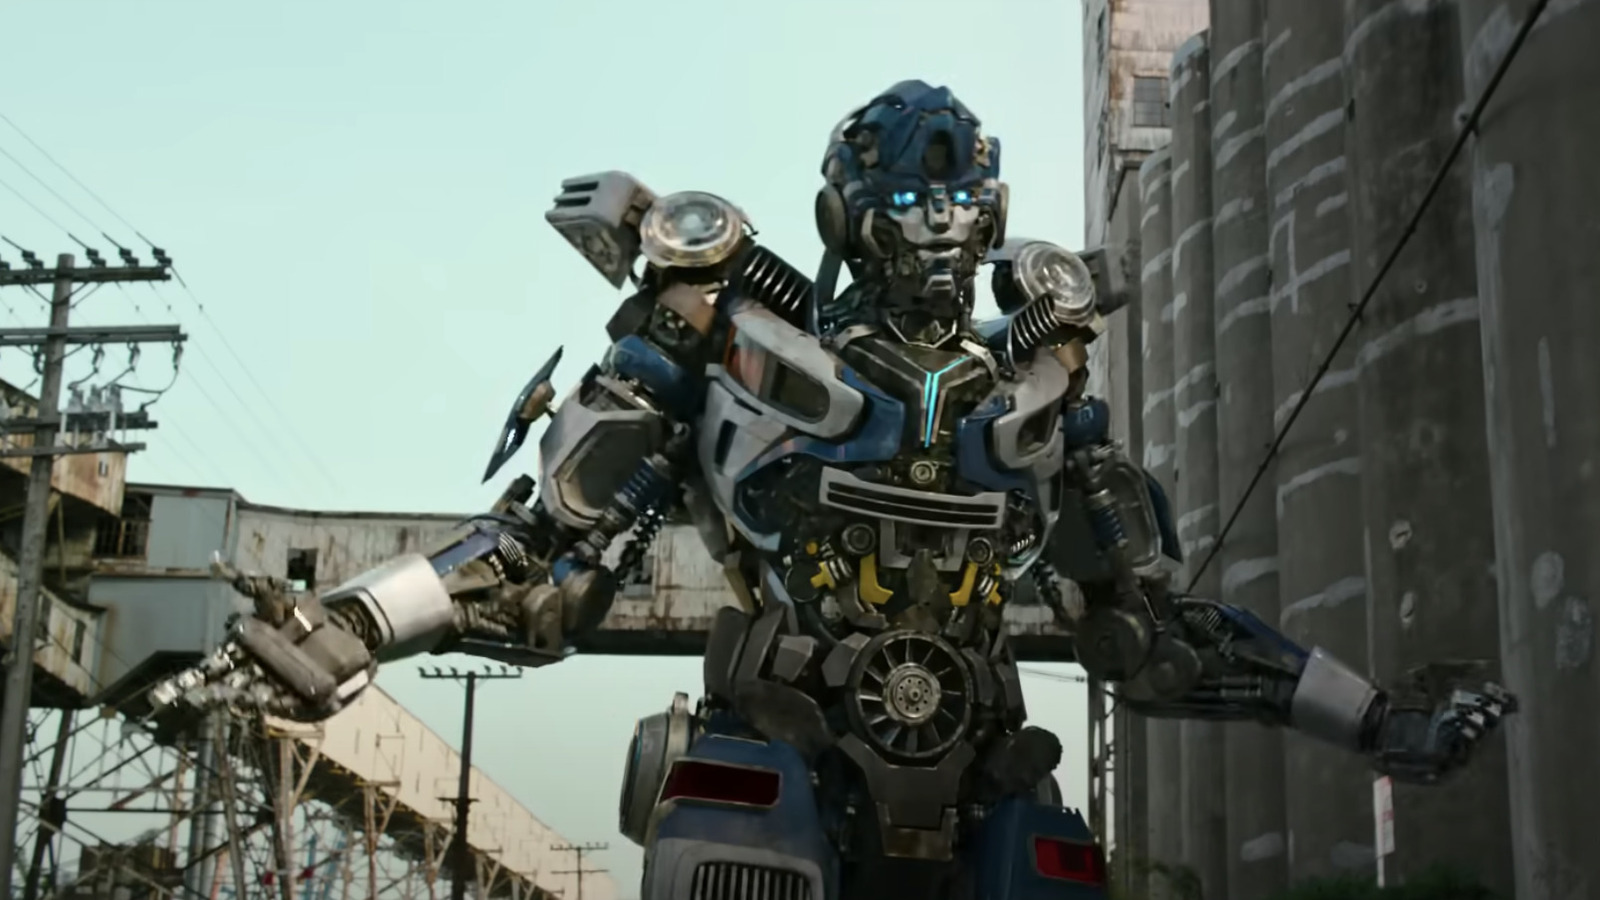 Meet Mirage, The Autobot Voiced By Pete Davidson In Transformers: Rise Of The Beasts – /Film